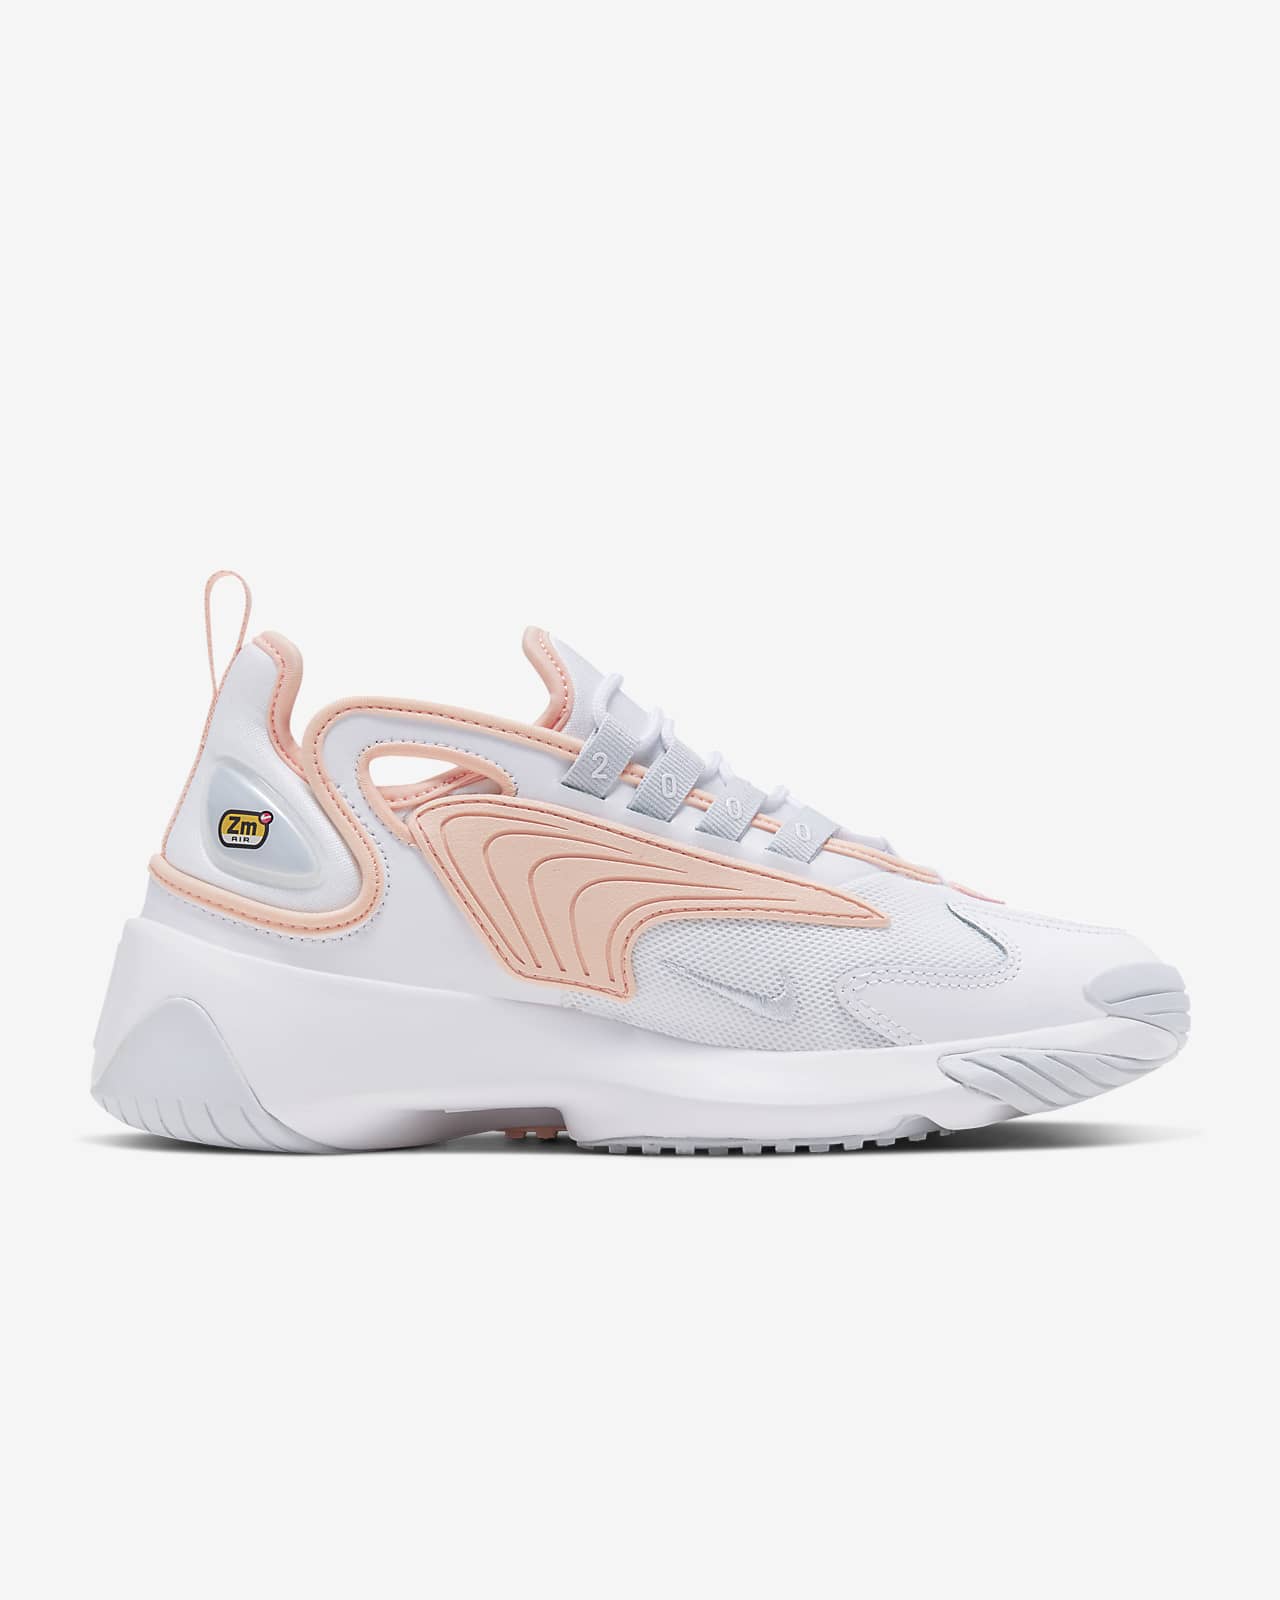 Nike Zoom 2k Pastel On Sale, UP TO 67% OFF